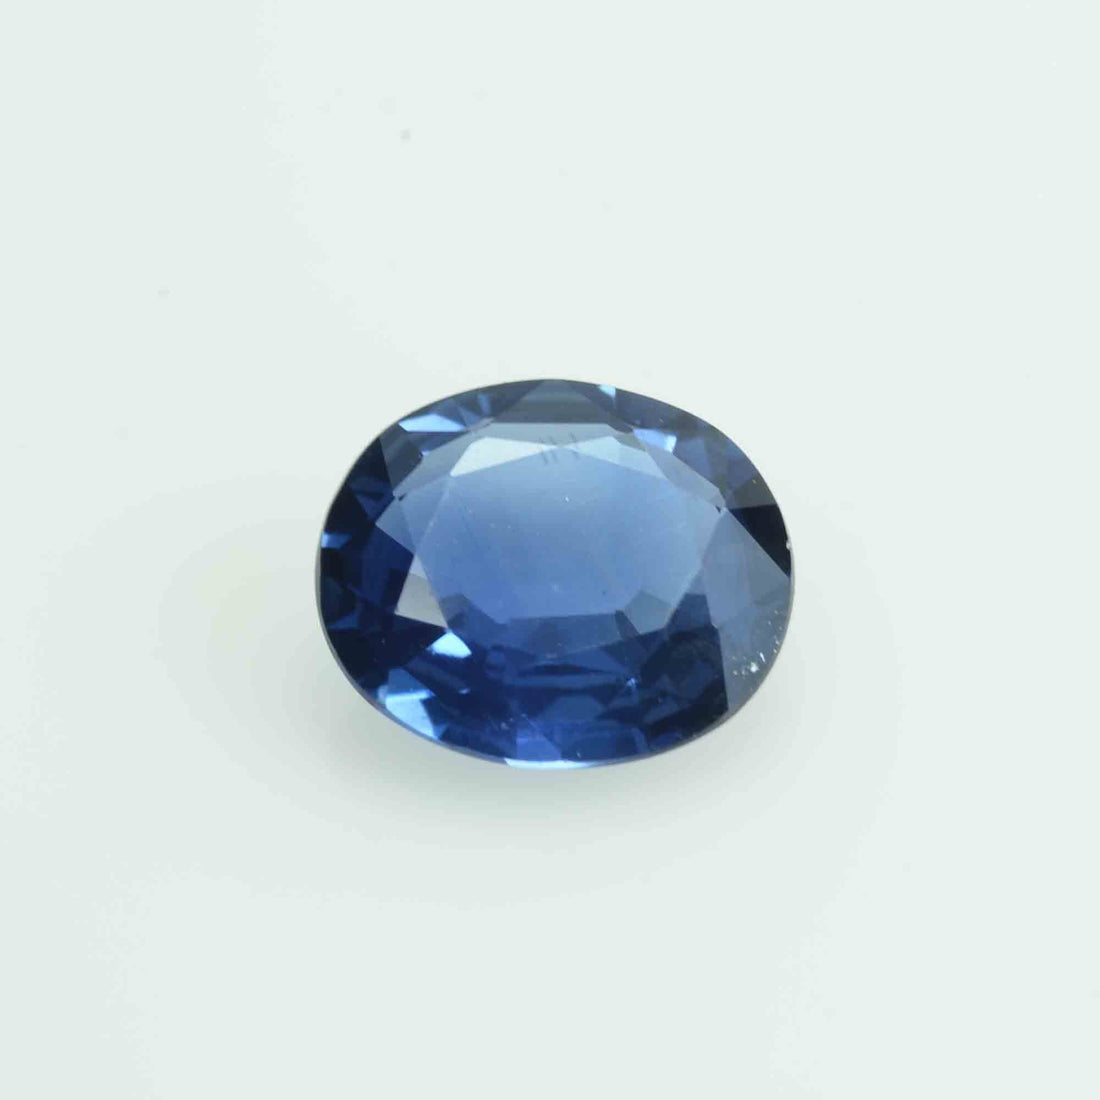 1.11 cts Natural Blue Sapphire Loose Gemstone Oval Cut